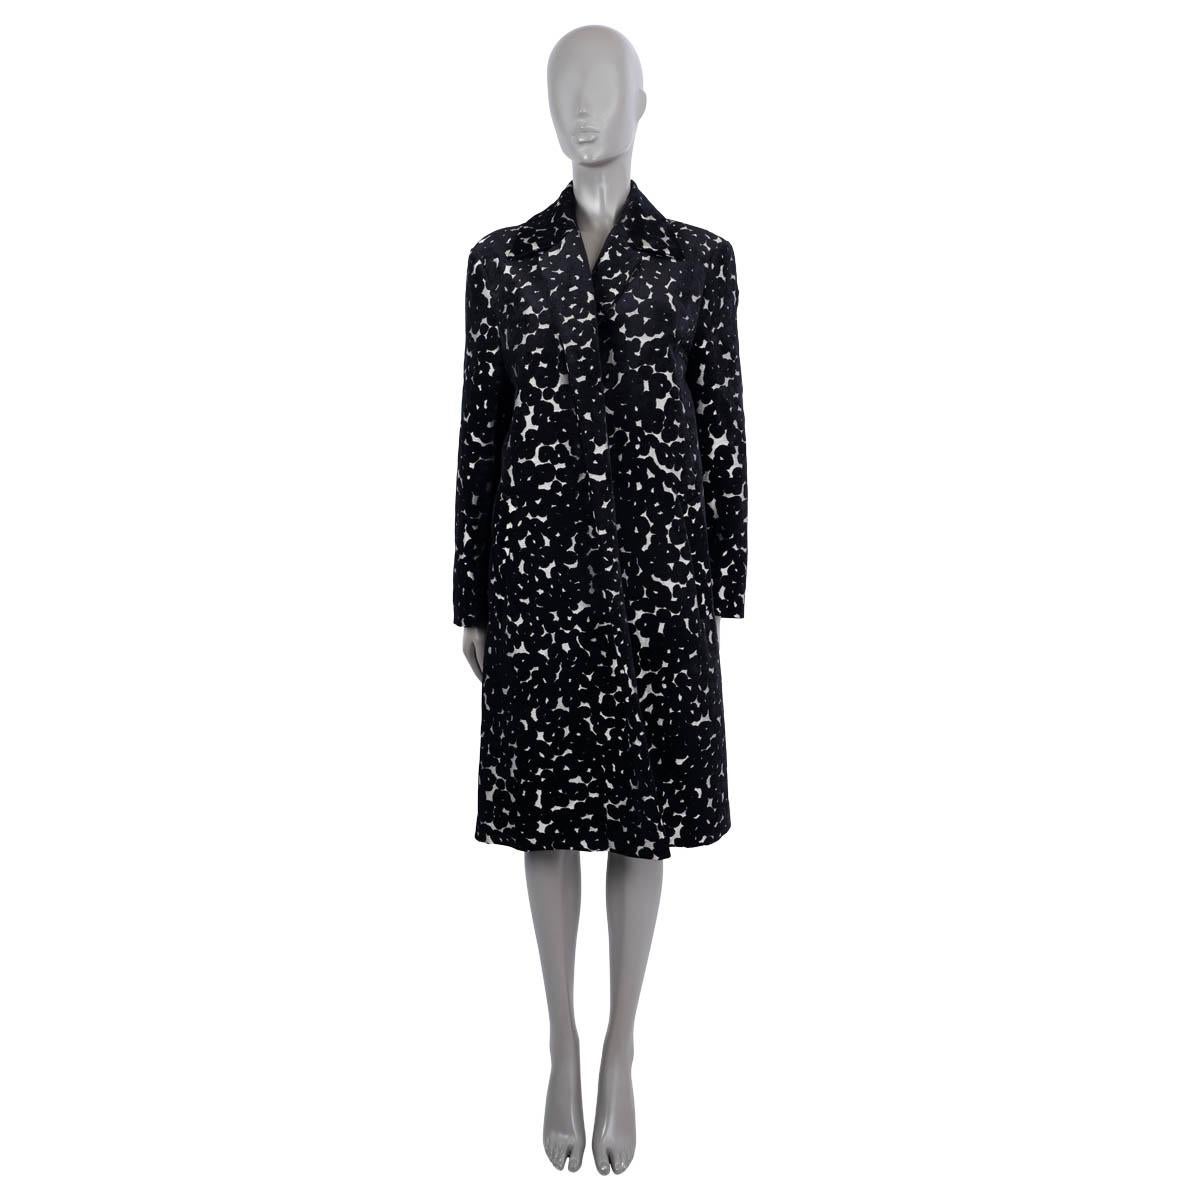 100% authentic Dries van Noten jacquard floral open coat black and white viscose (61%), cotton (26%), and polyester (13%). Features two slit pockets on the side. Lined in black cotton (64%) and cupro (36%). Has been worn and is in excellent